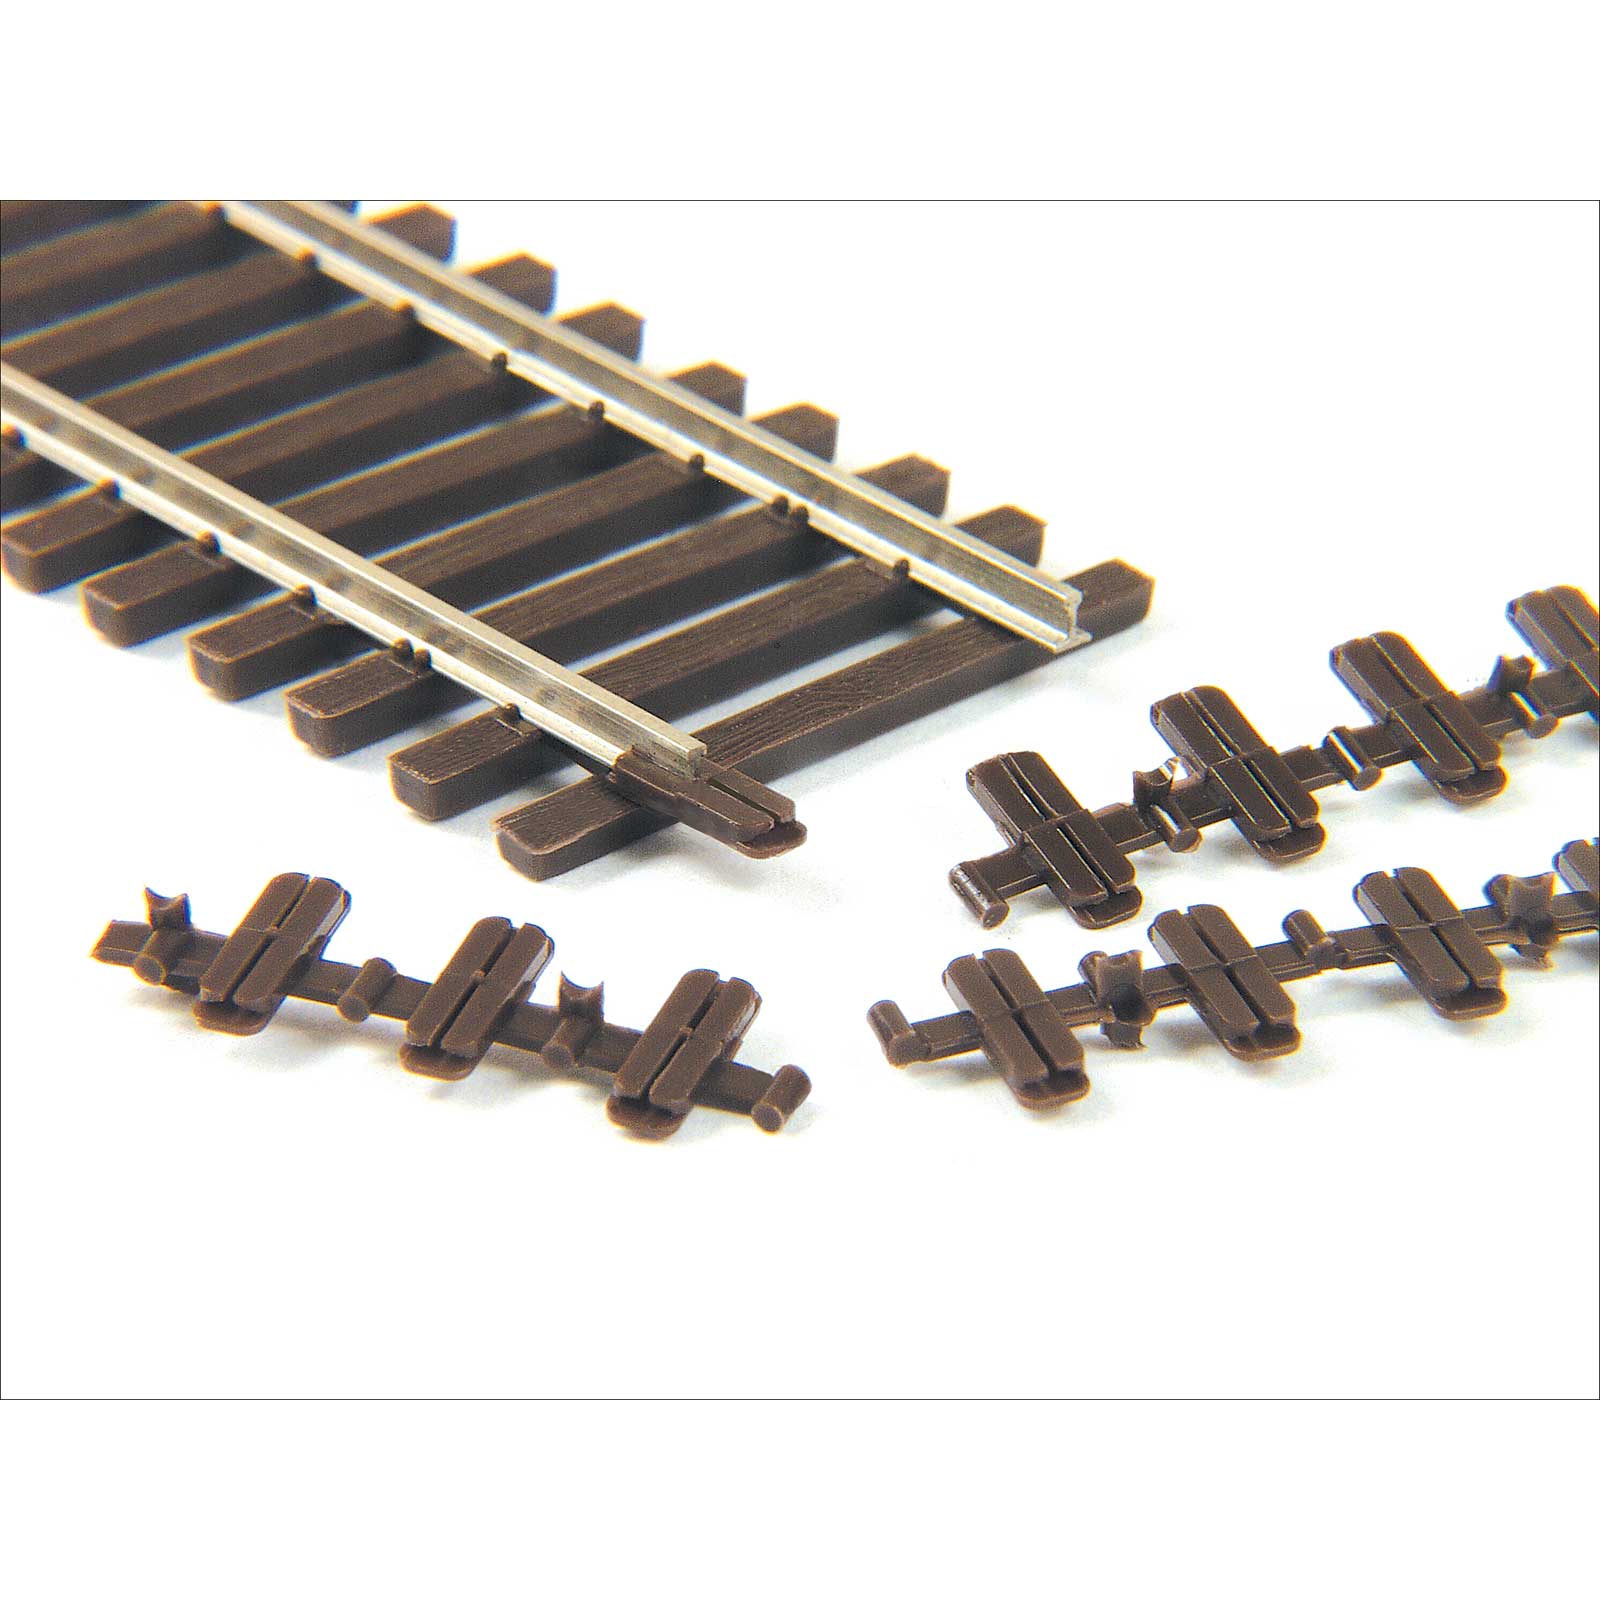 Insulated Rail Joiners for Code 70 Rail, (Pkg of 12) - Micro - Mark Model Train Accessories